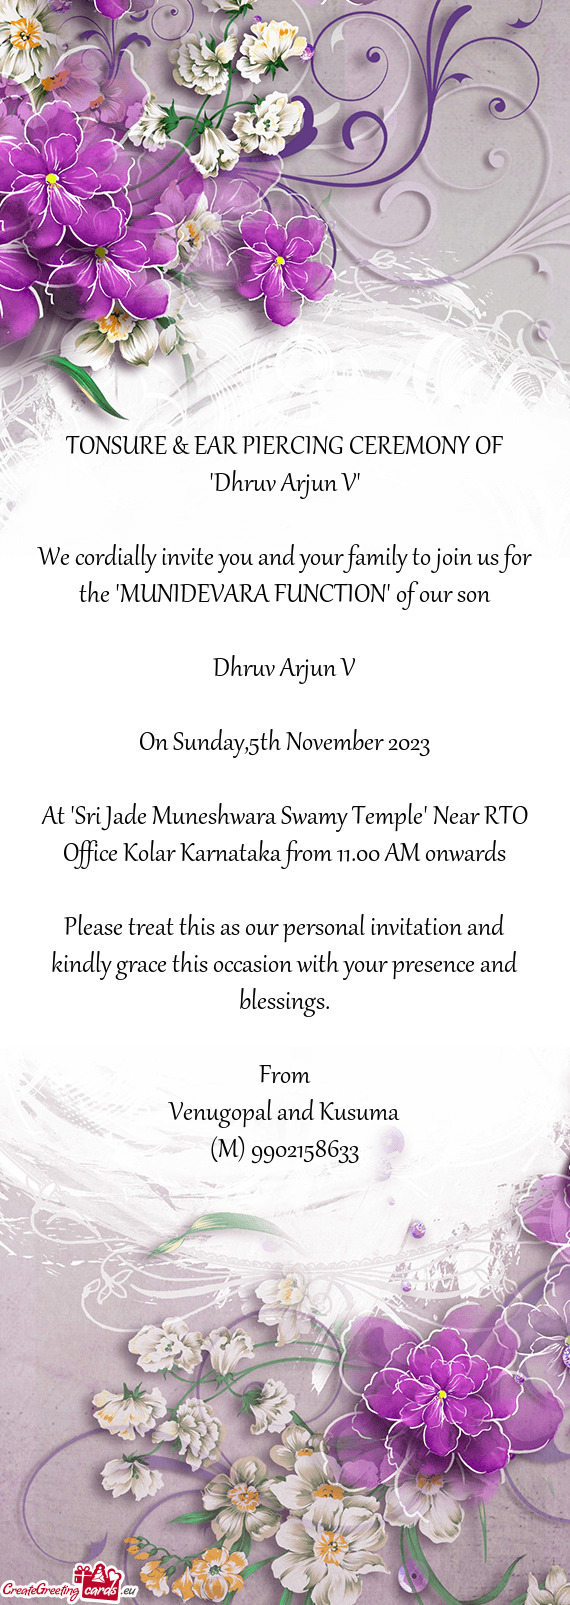 We cordially invite you and your family to join us for the "MUNIDEVARA FUNCTION" of our son